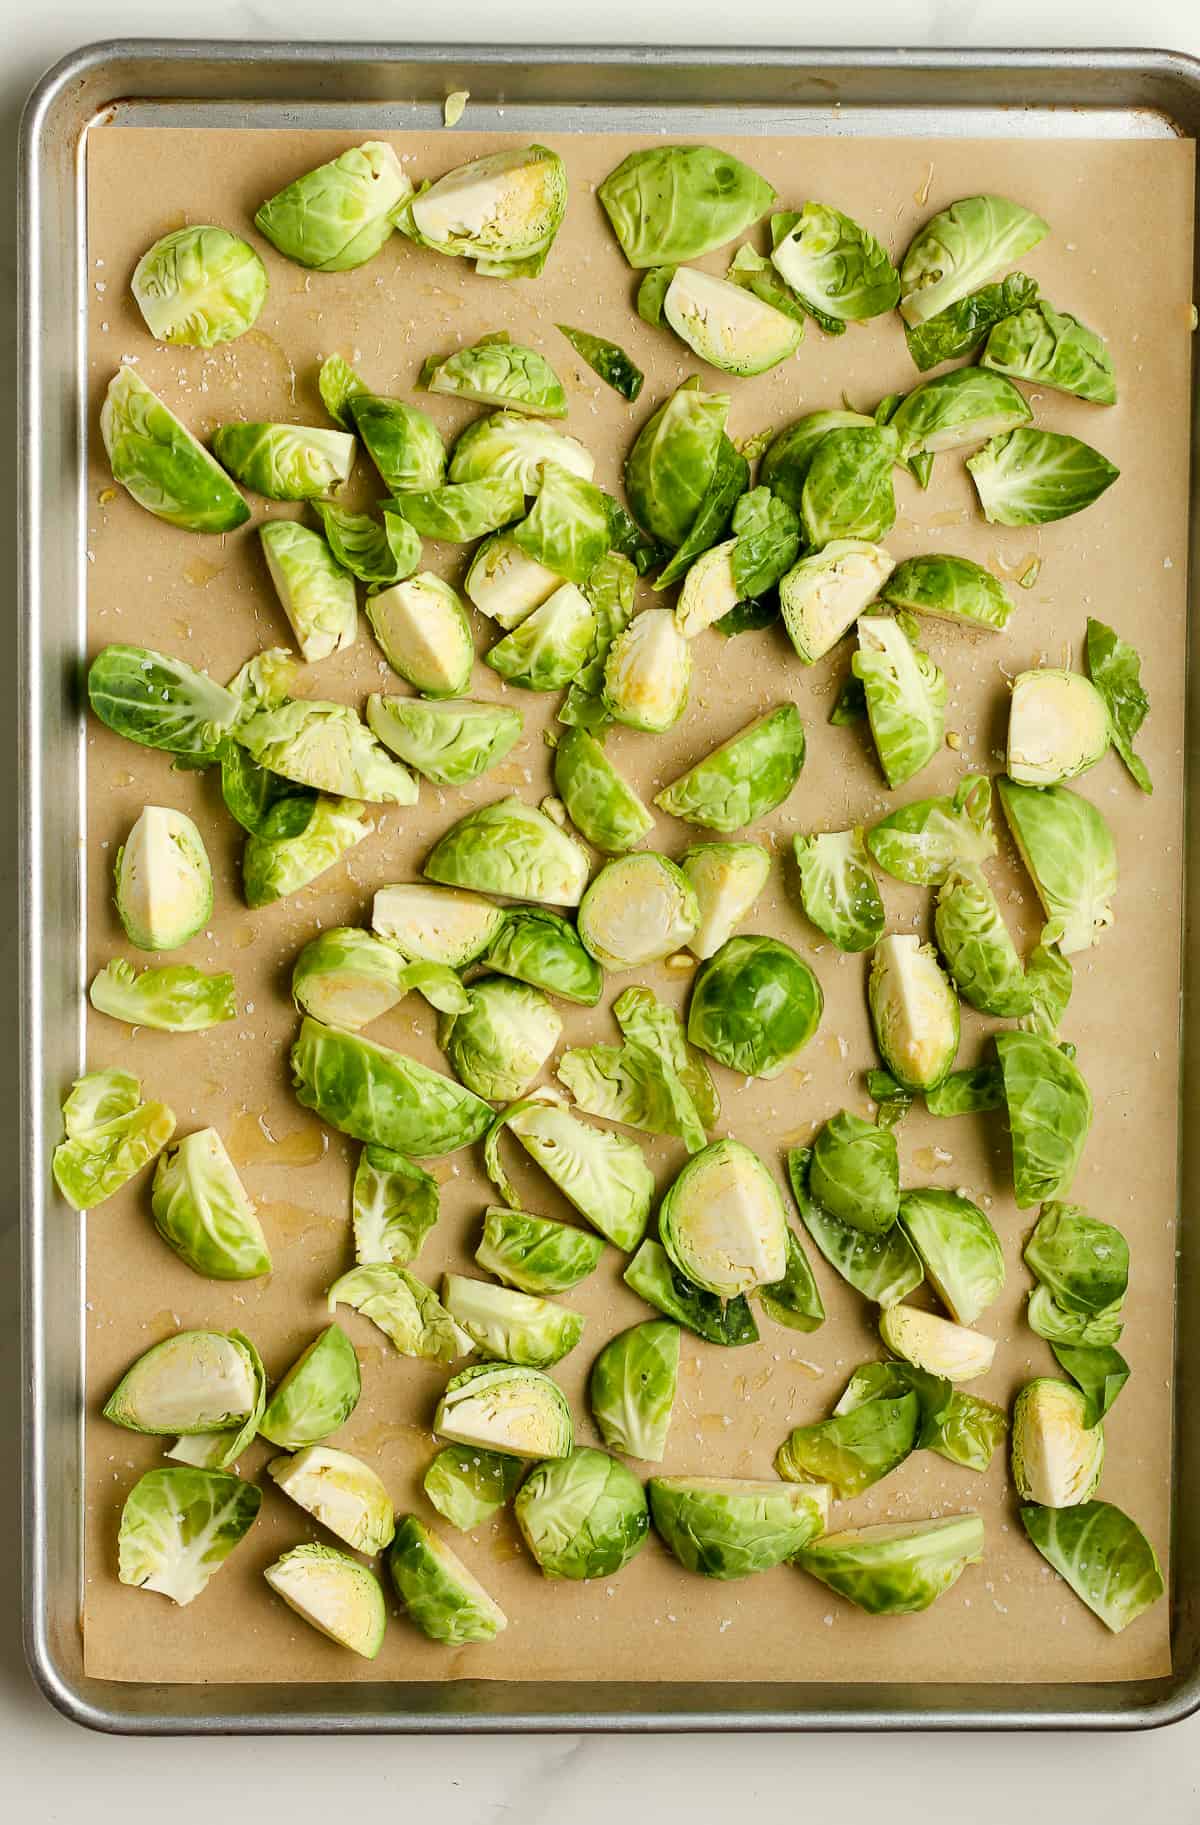 A pan of the Brussels sprouts before cooking.